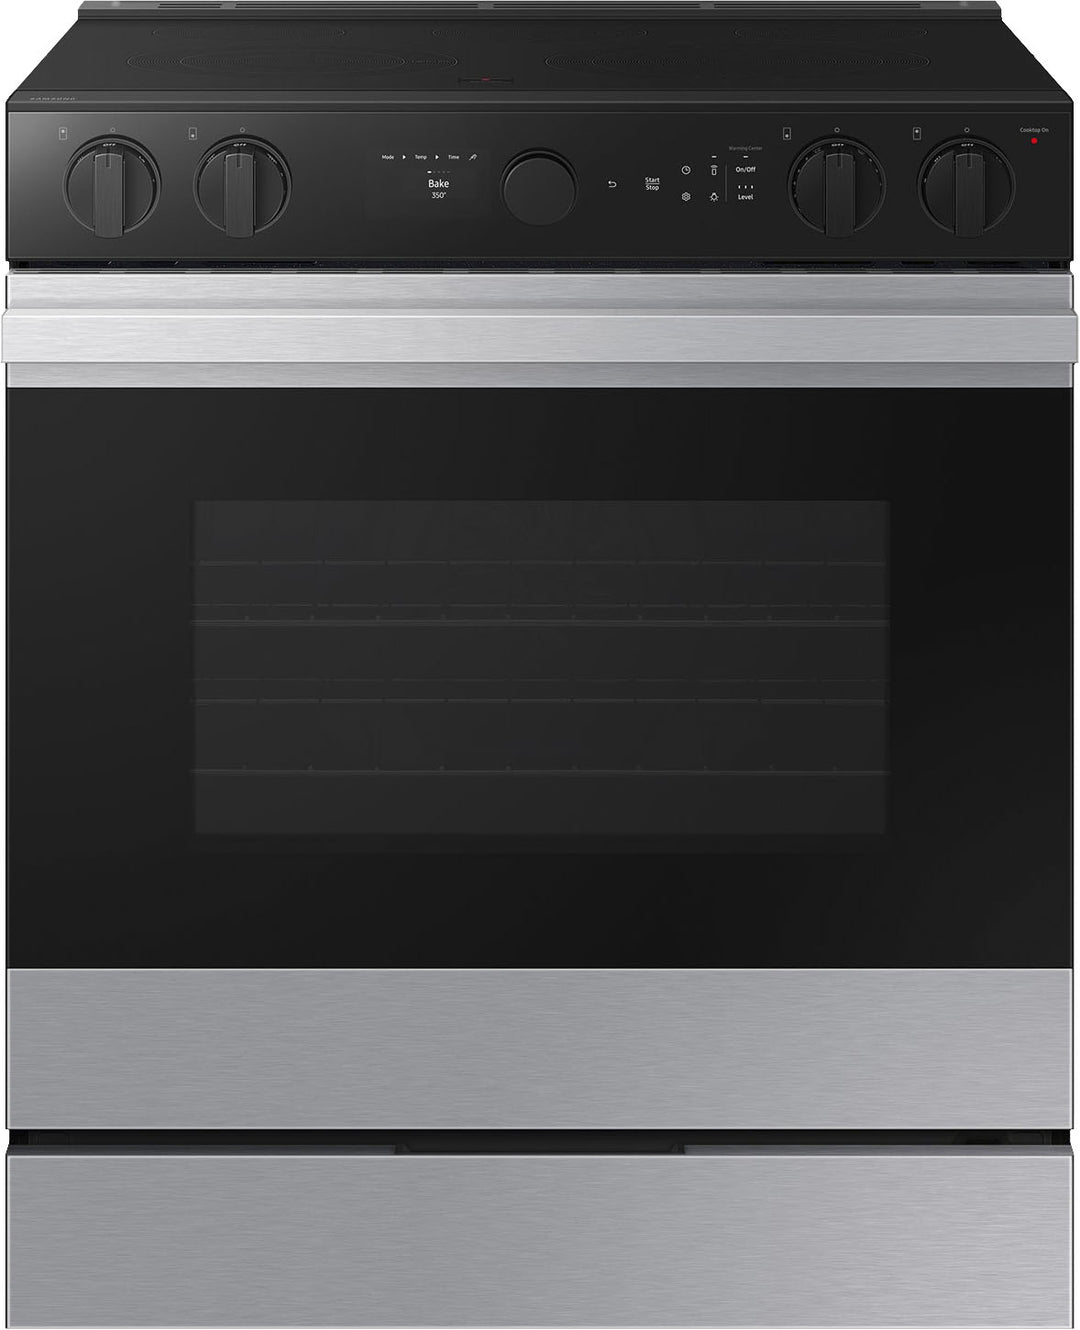 Samsung - Bespoke 6.3 Cu. Ft. Slide-In Electric Range with Air Sous Vide - Stainless Steel_0